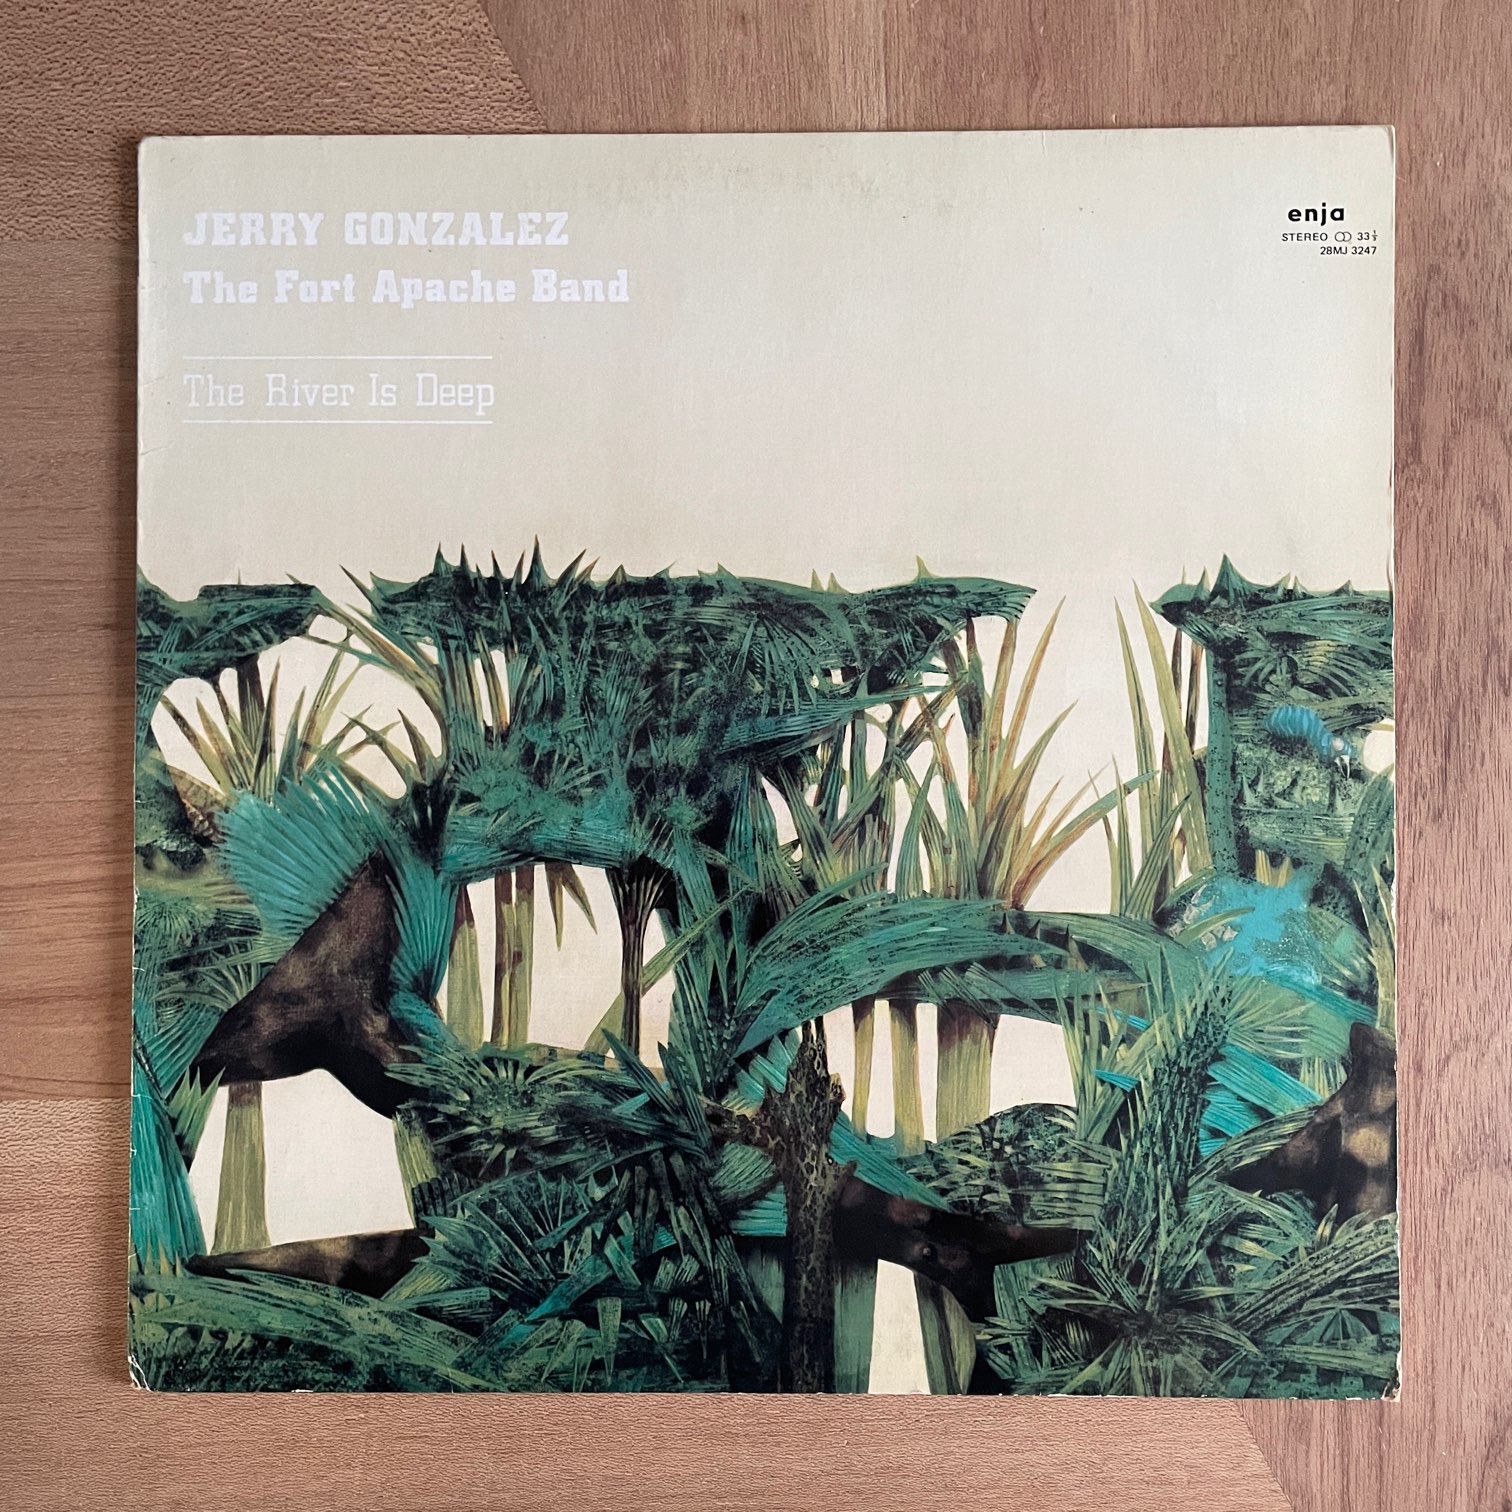 JERRY GONZALEZ & THE FORT APACHE BAND / THE RIVER IS DEEP